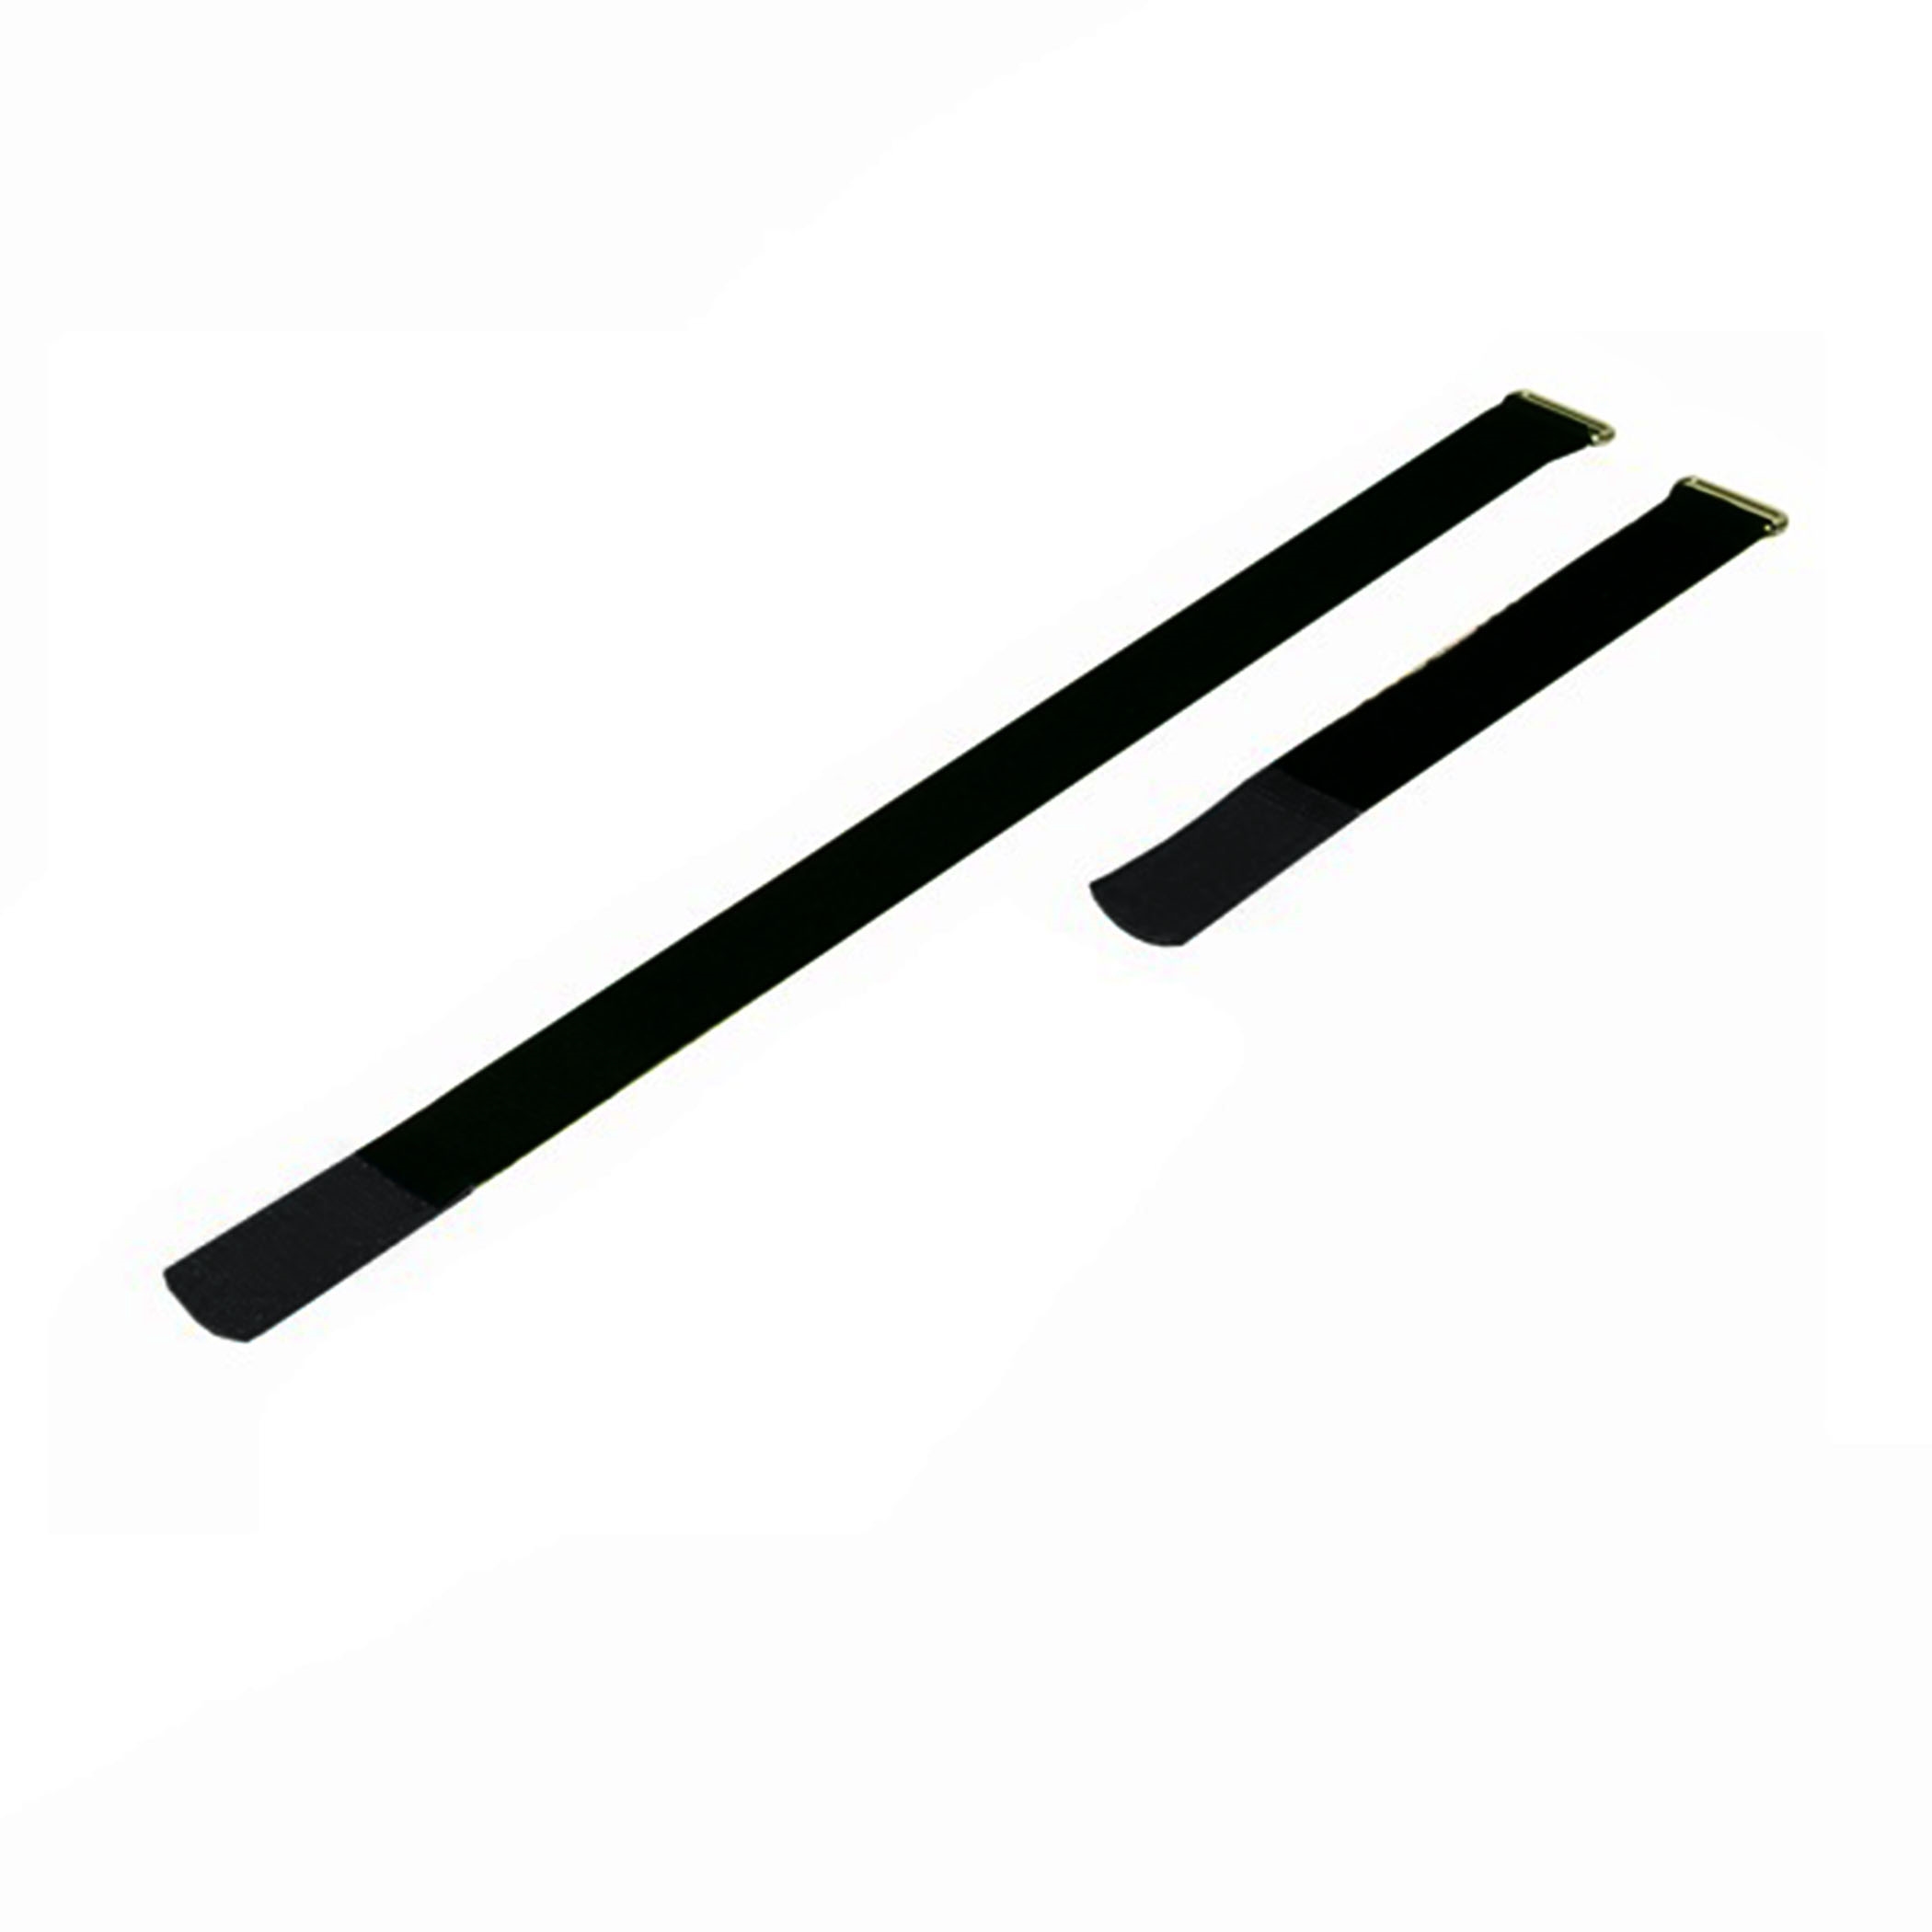 Cable Tie 220x25mm with Hook Black, (10 pieces) - a2522-500h